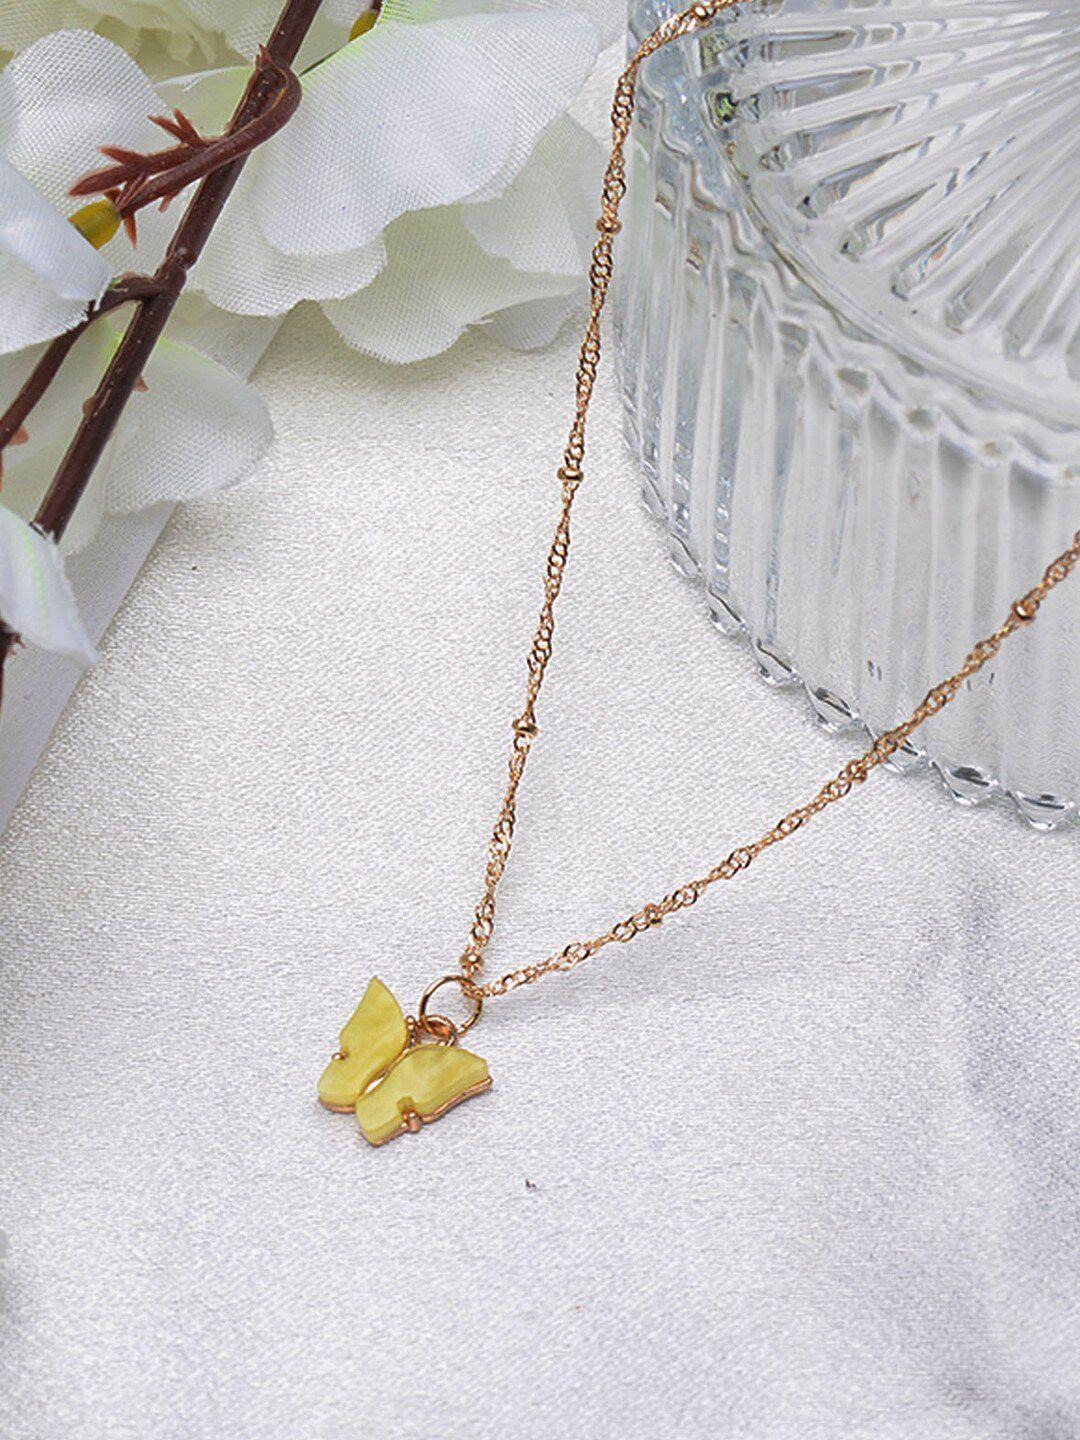 poplins yellow & gold-toned butterfly pendant chain